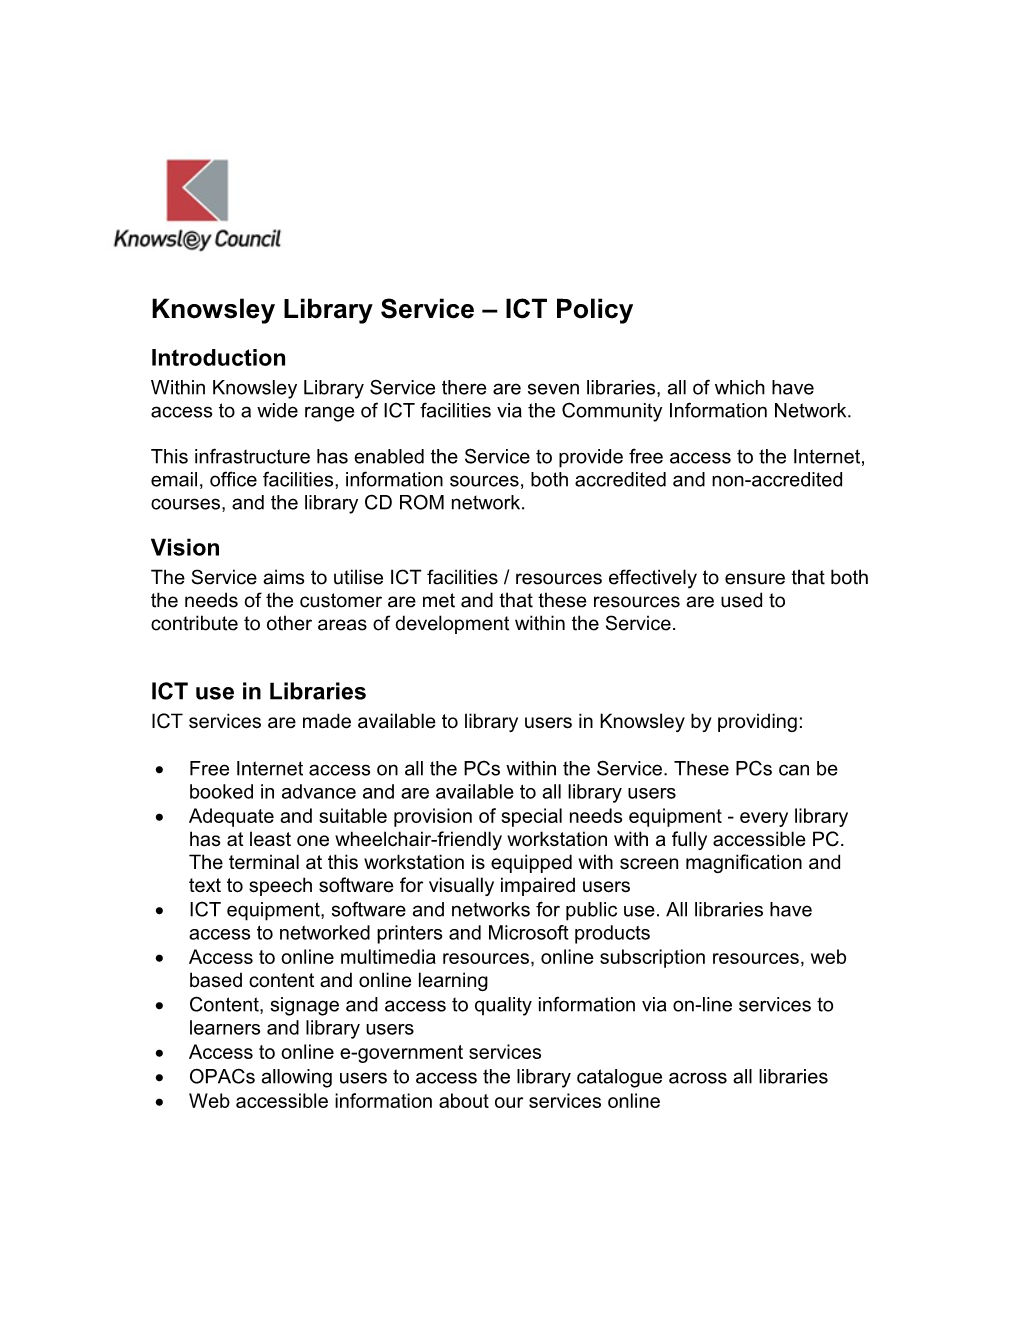 Knowsley Library Service ICT Policy